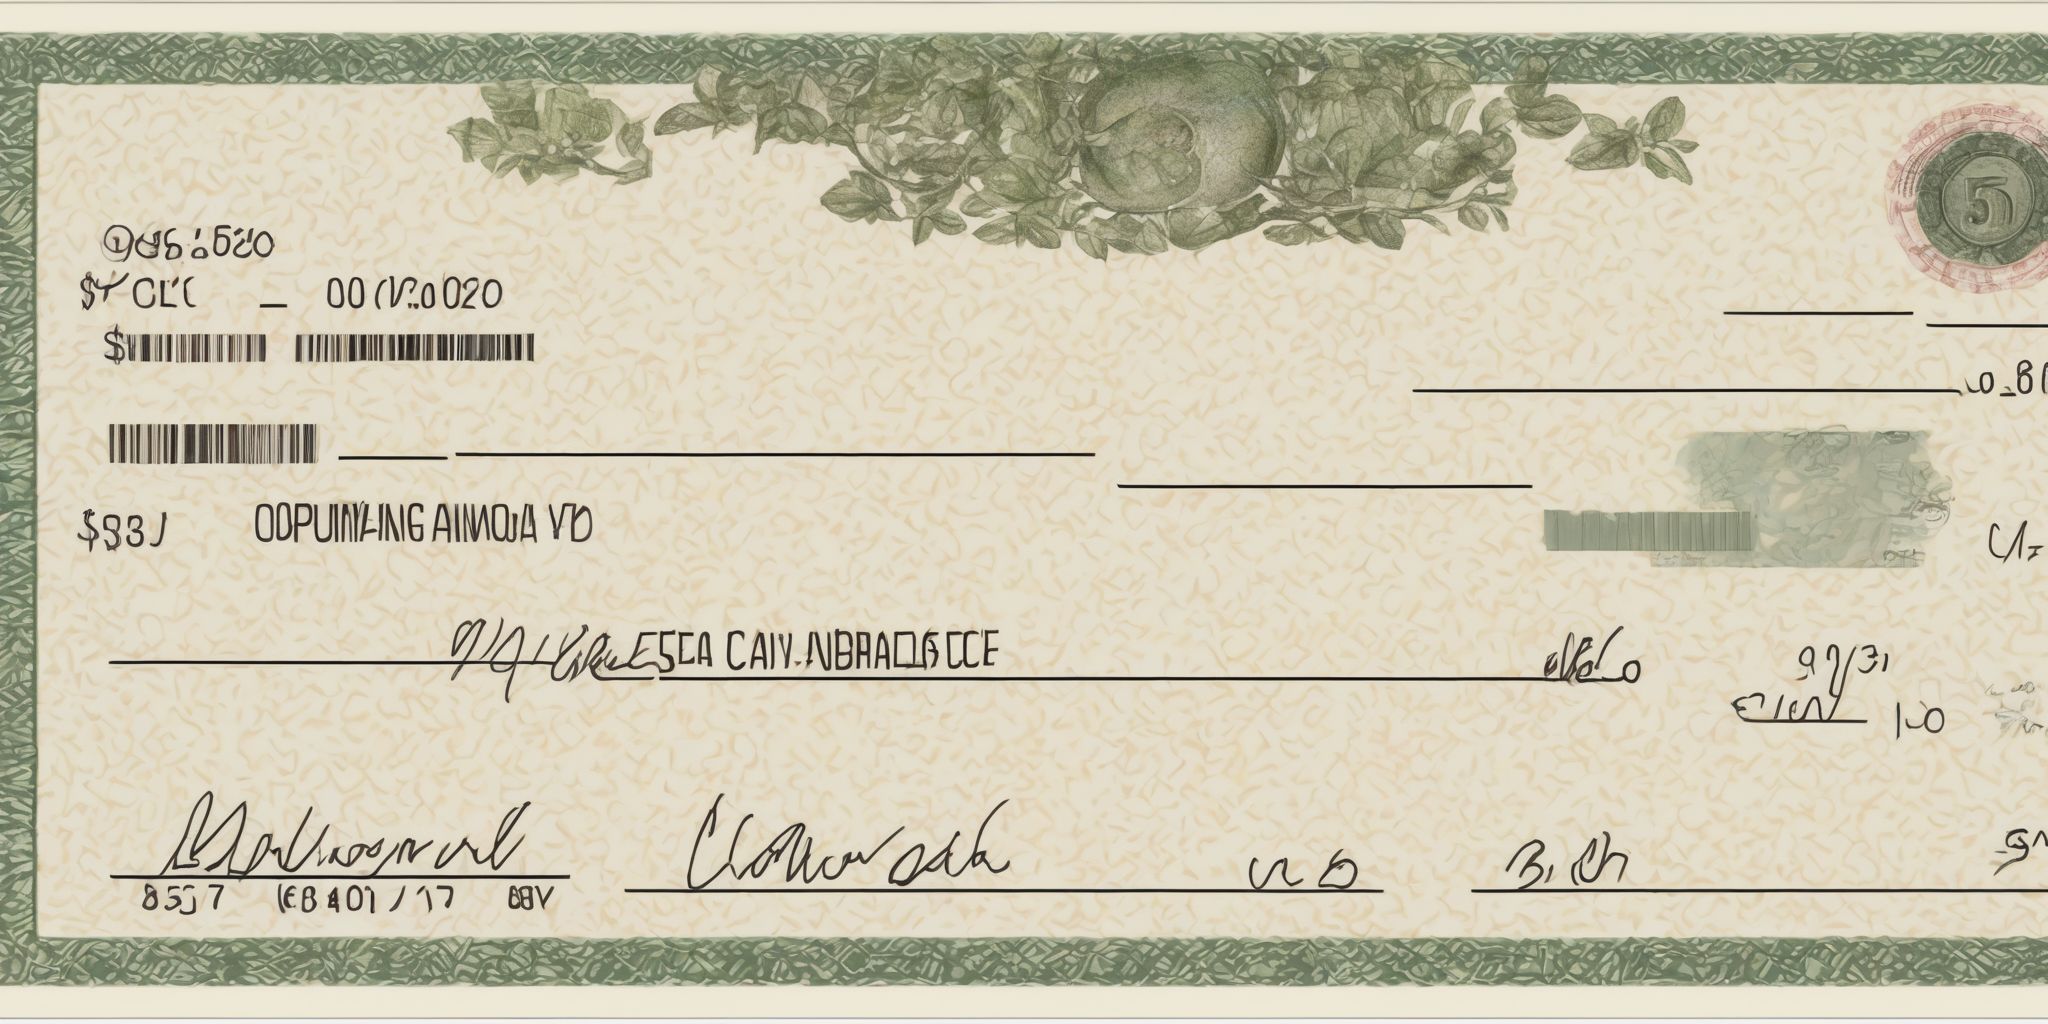 Cheque  in realistic, photographic style